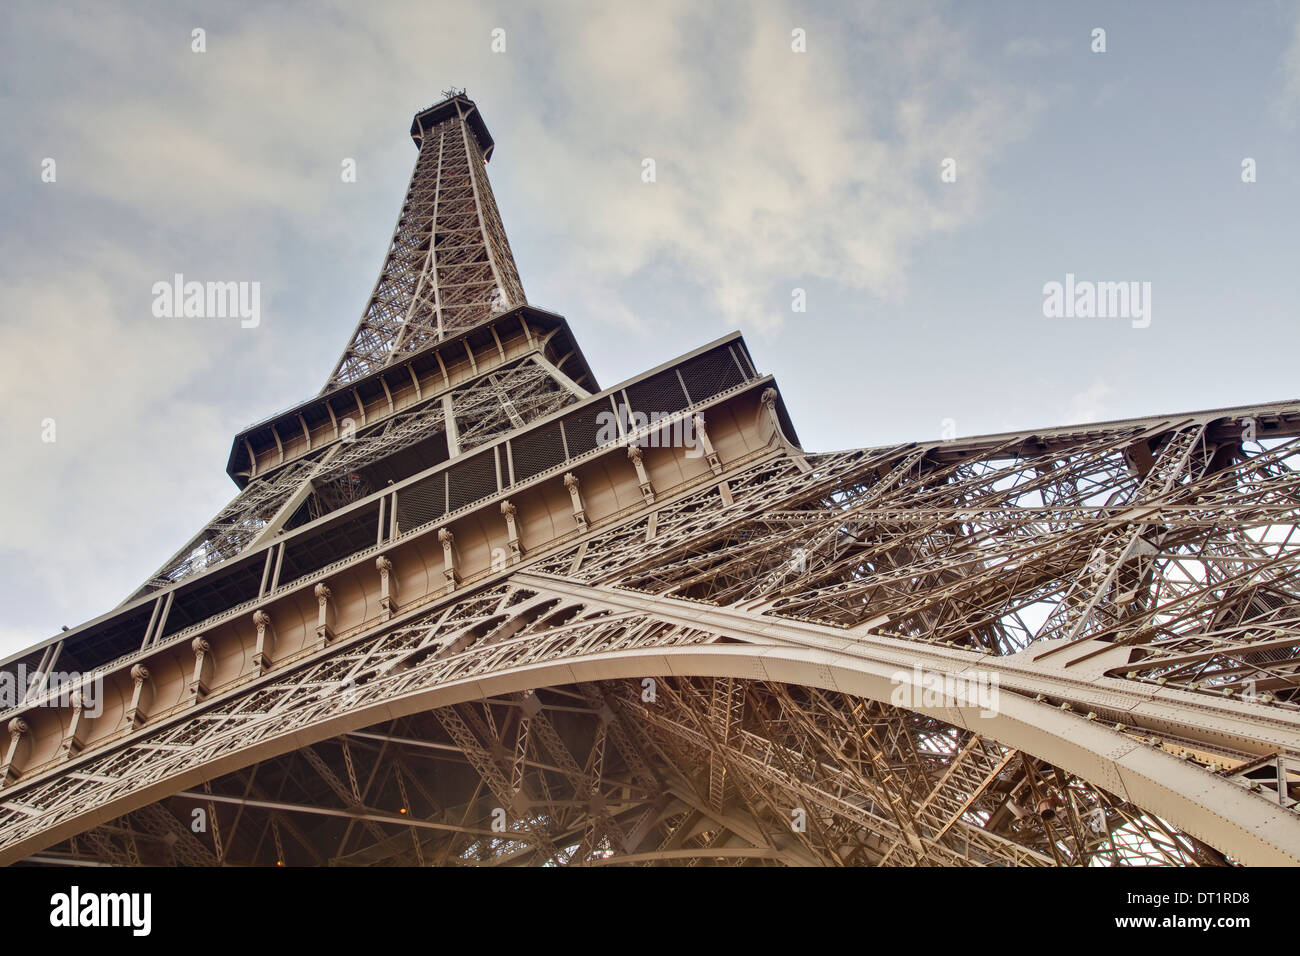 The Eiffel Tower towers overhead, Paris, France, Europe Stock Photo